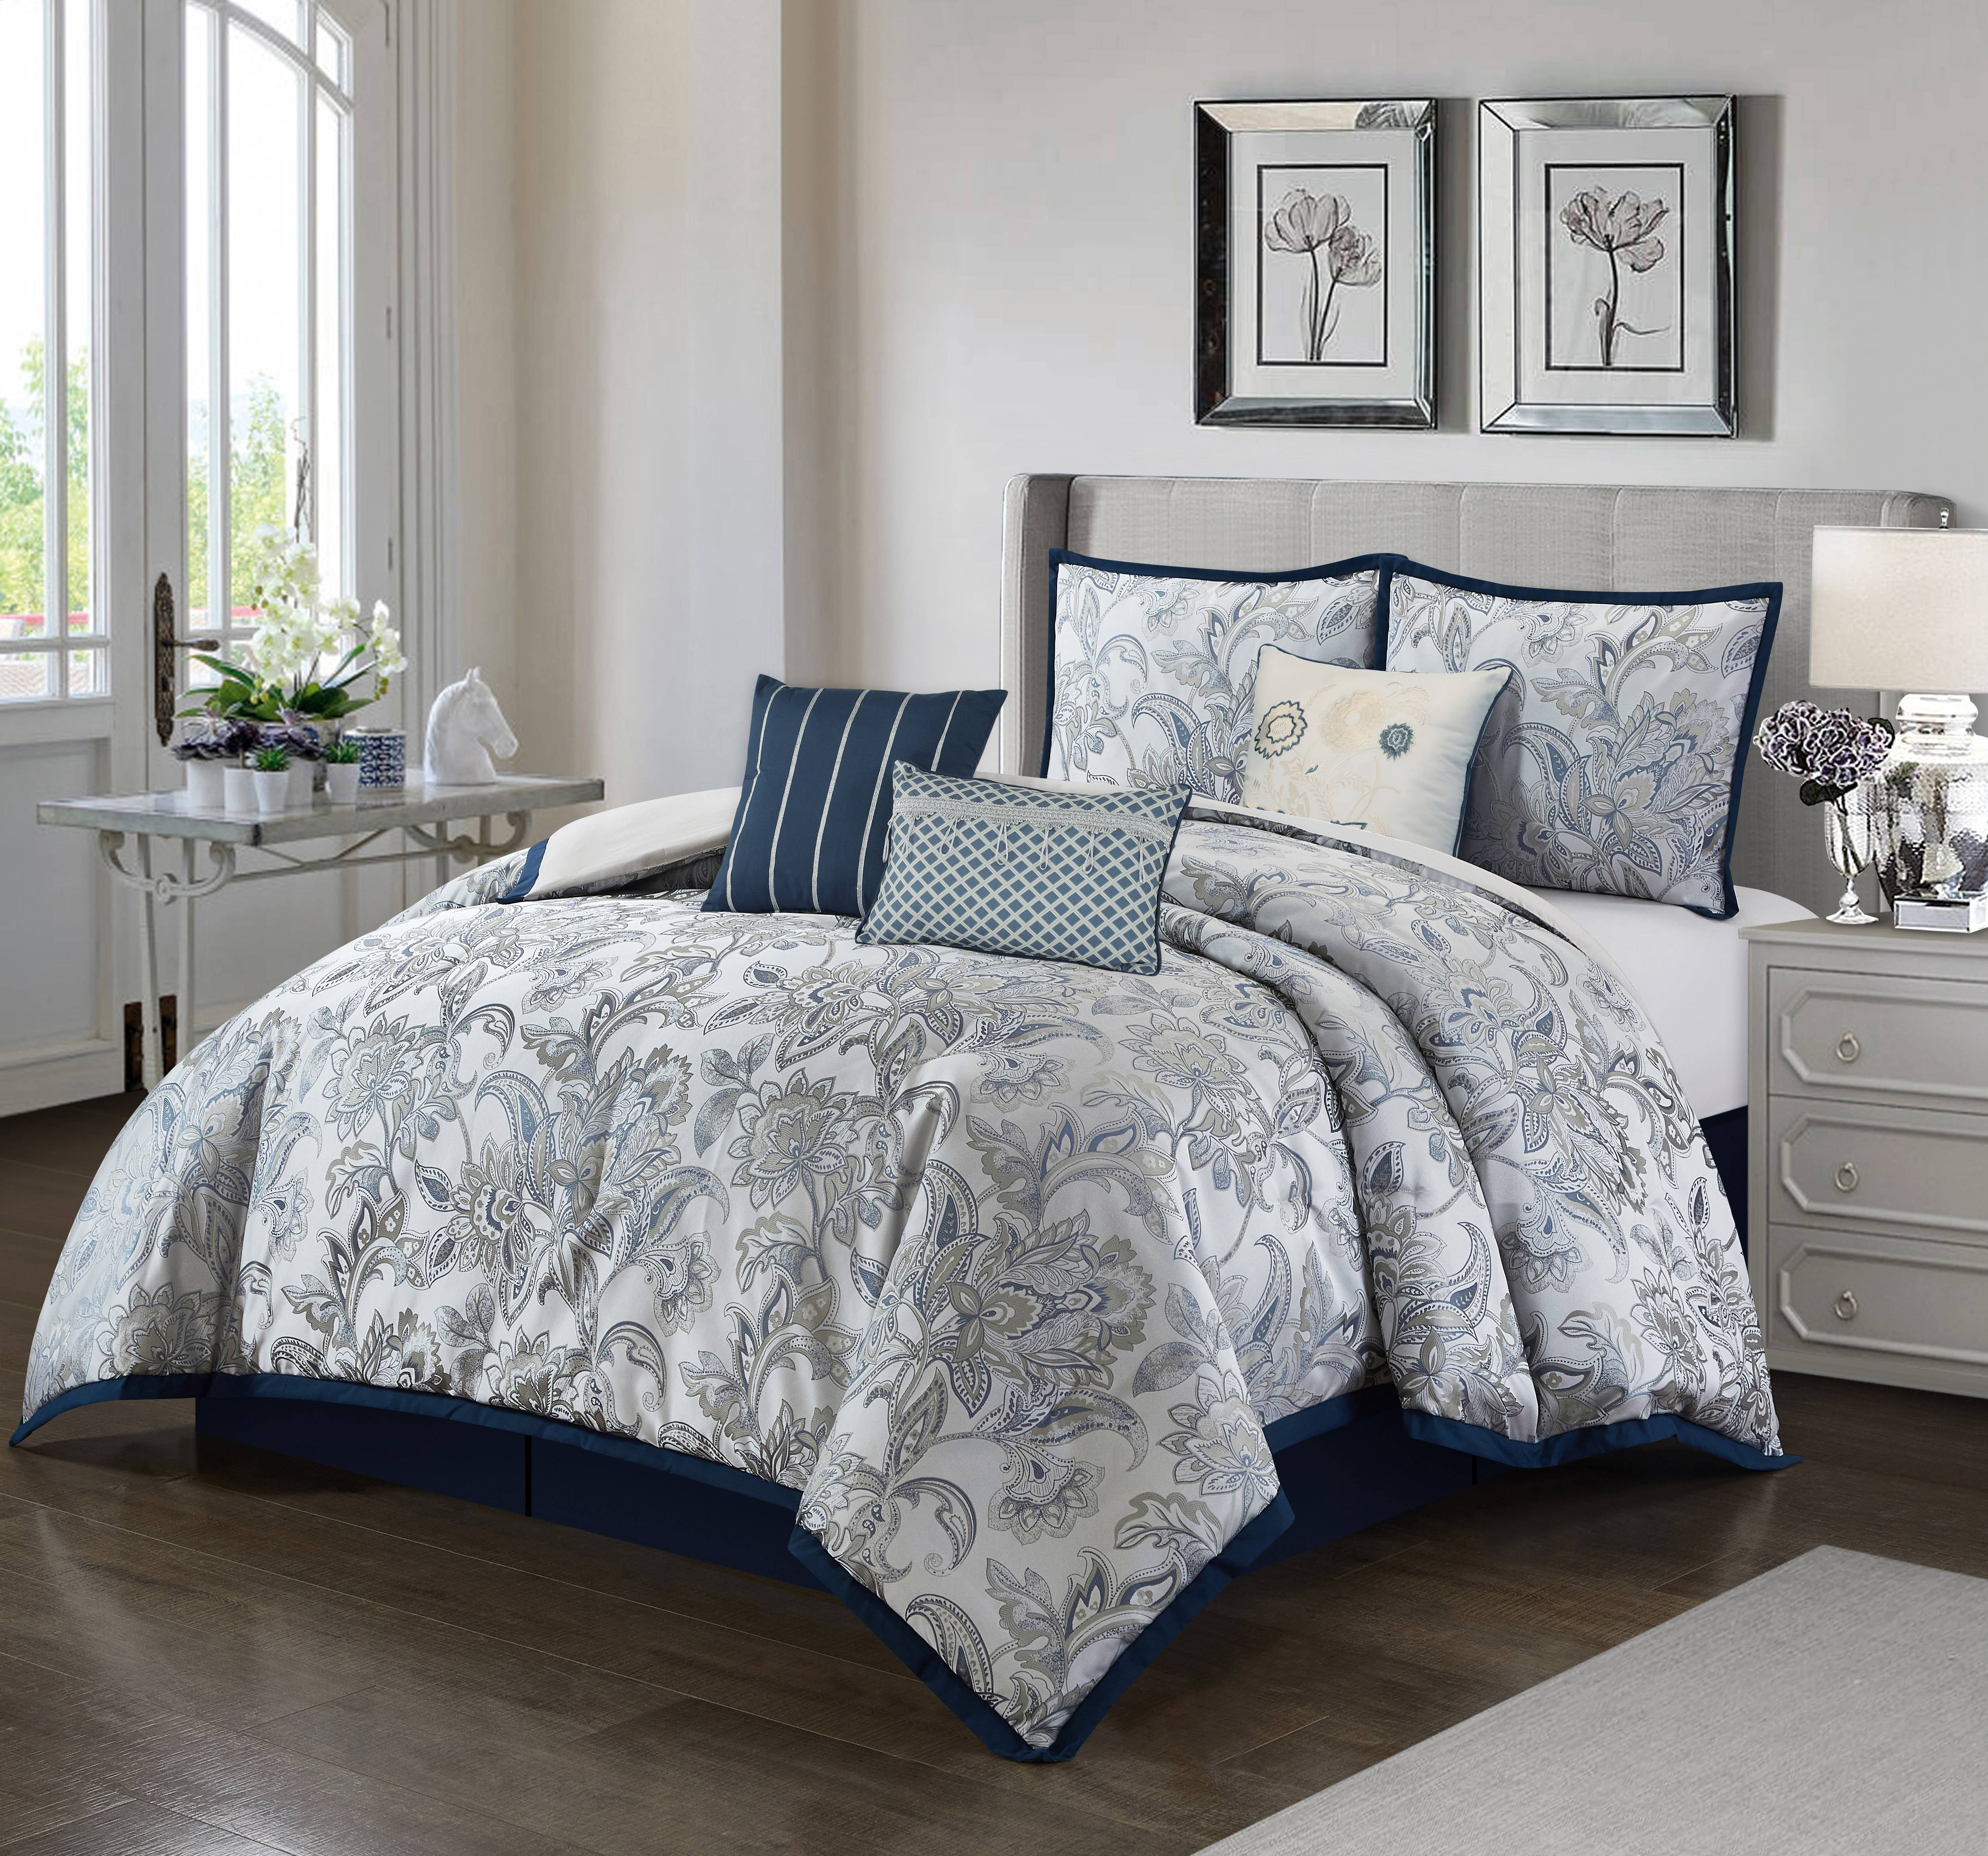 Queen White Gray Paisley 7 Piece Comforter Set with Embroidered Cushion